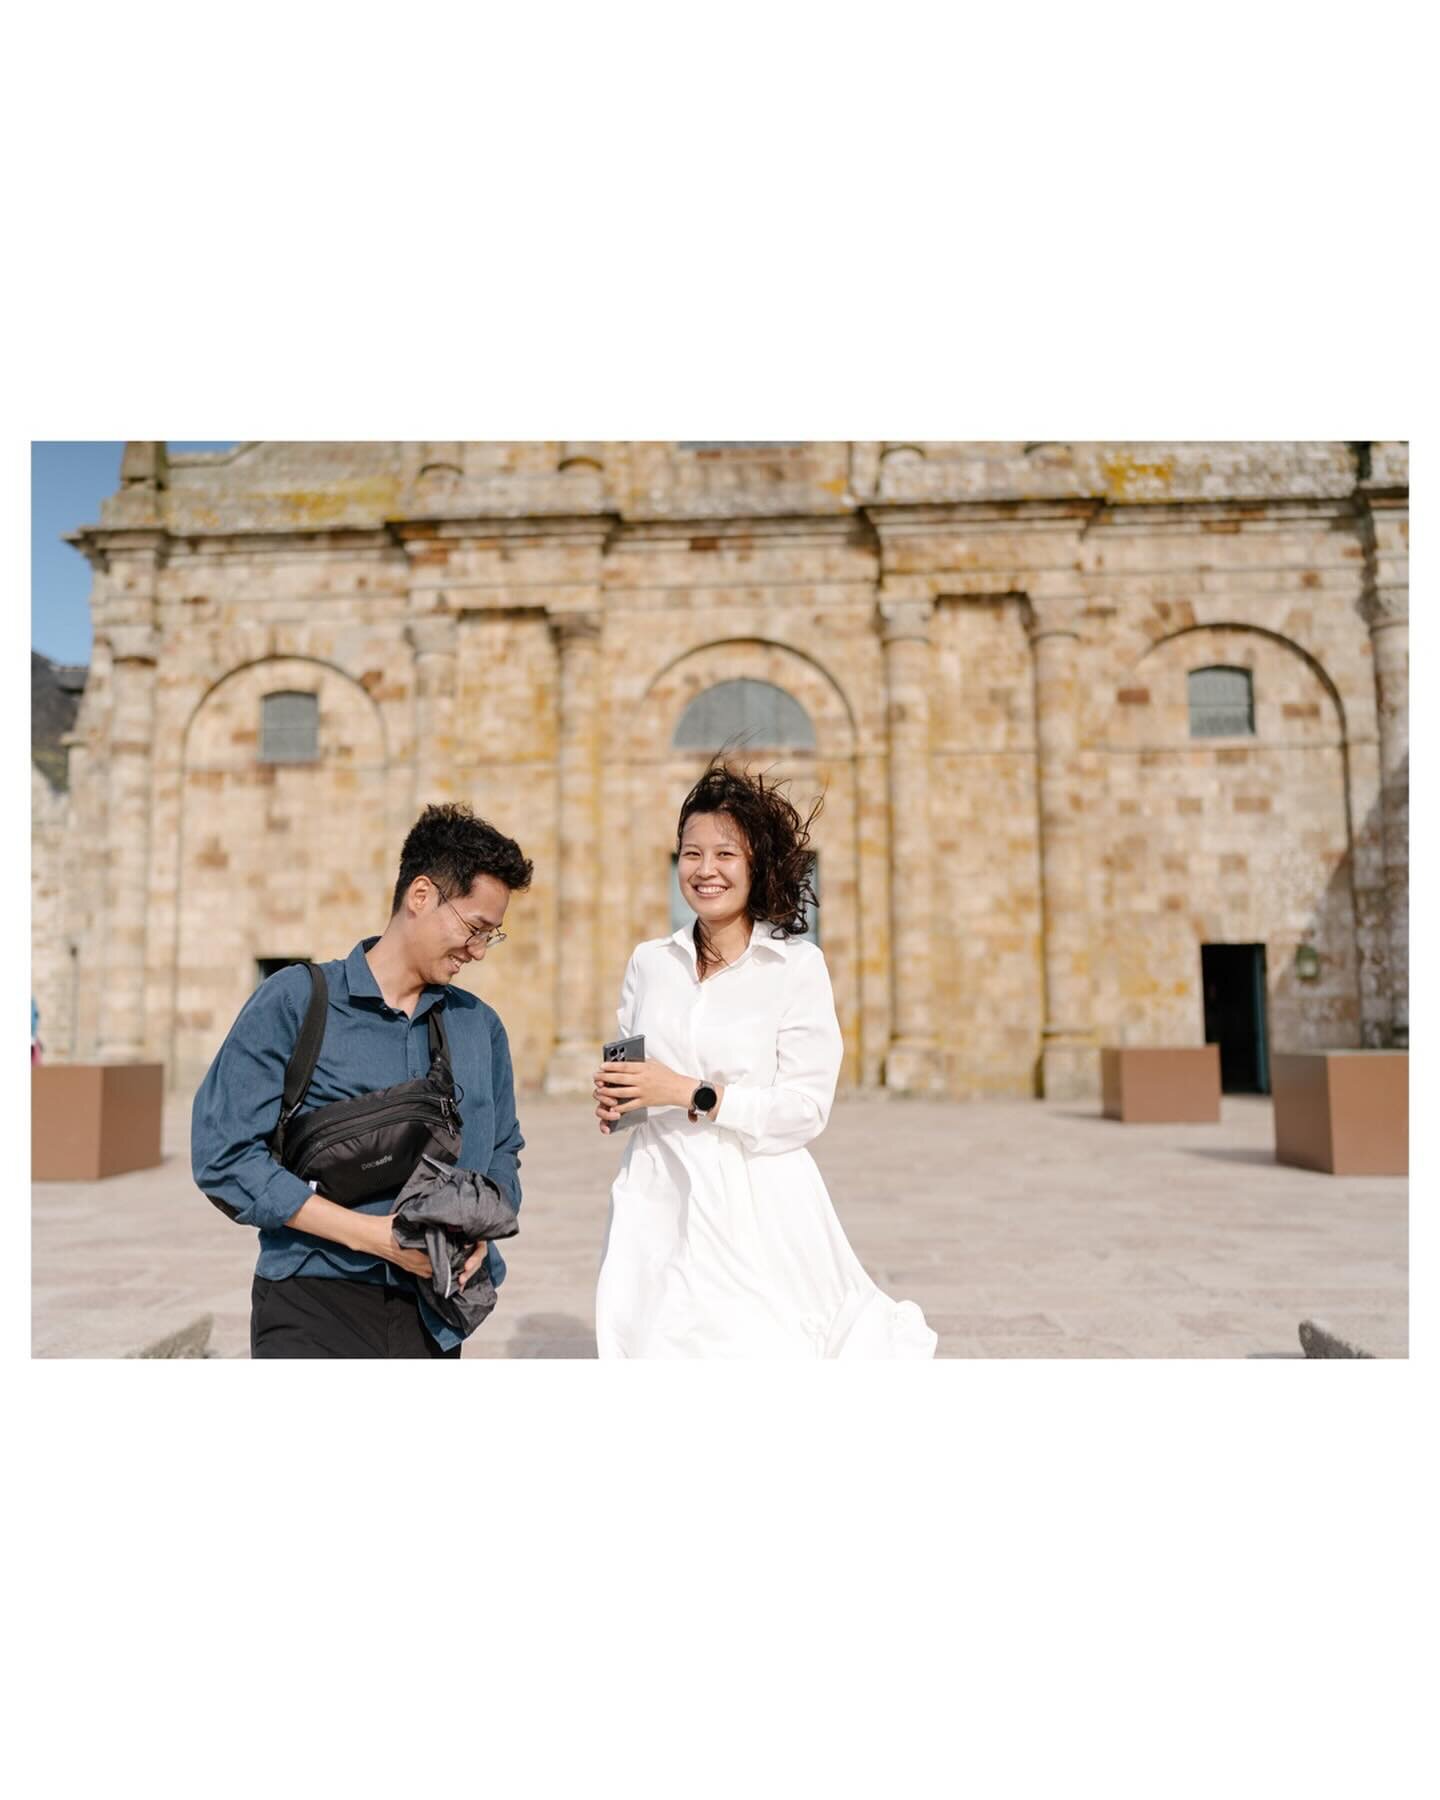 I saw this tender, giggling couple from afar on top of the blustery Mont-Saint Michel abbey and knew I had to ask them to take their photo. Turns out they had just married and were honeymooning, traveling from Japan. Coupla kids in love.